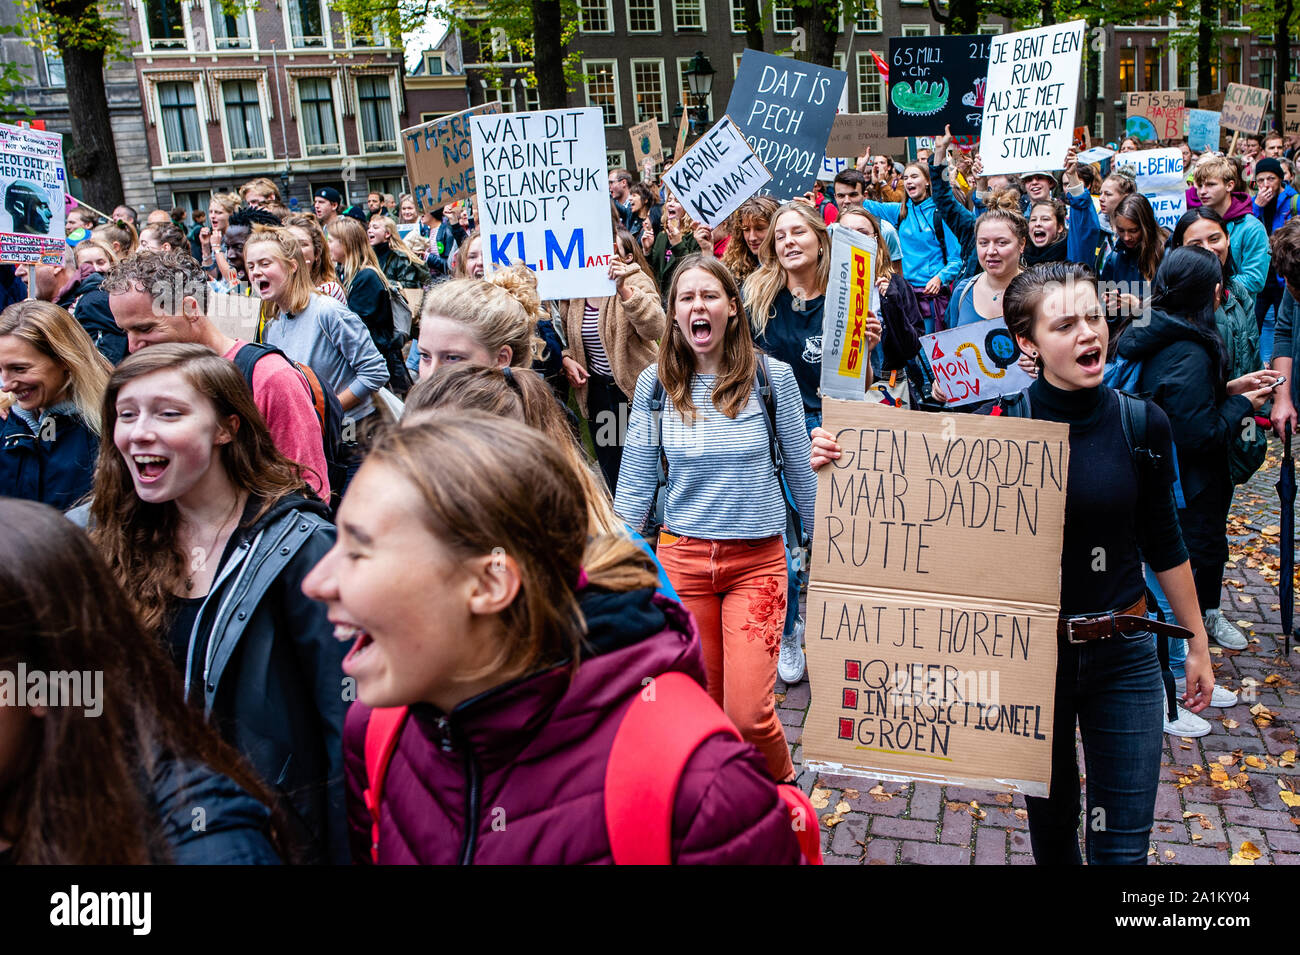 Dutch students shouting slogans while walking during the demonstration.Large coalition of organizations in The Netherlands organized the climate strike, and it is part of the largest international climate mobilisation in history. Building on the successful youth strikes that started almost a year ago, thousands of people strike together for the first time to demand a liveable and just world, now and for the future. Stock Photo